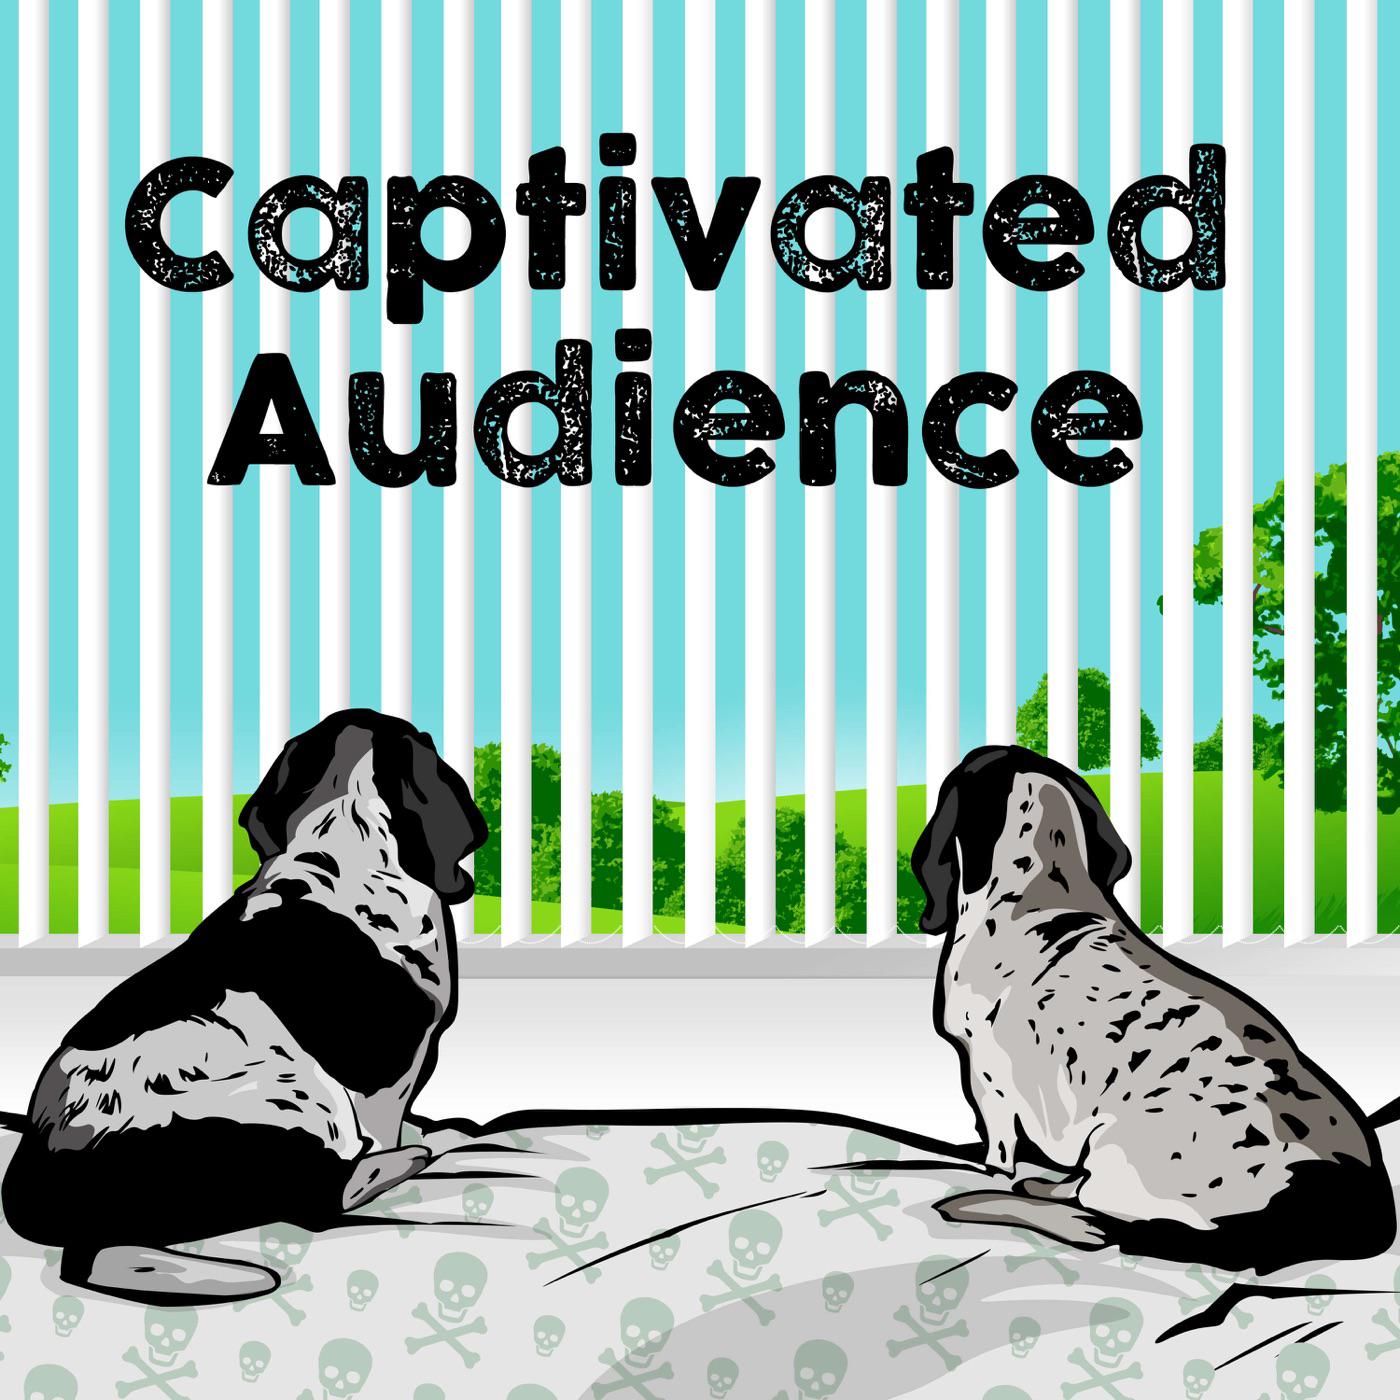 captivated-audience